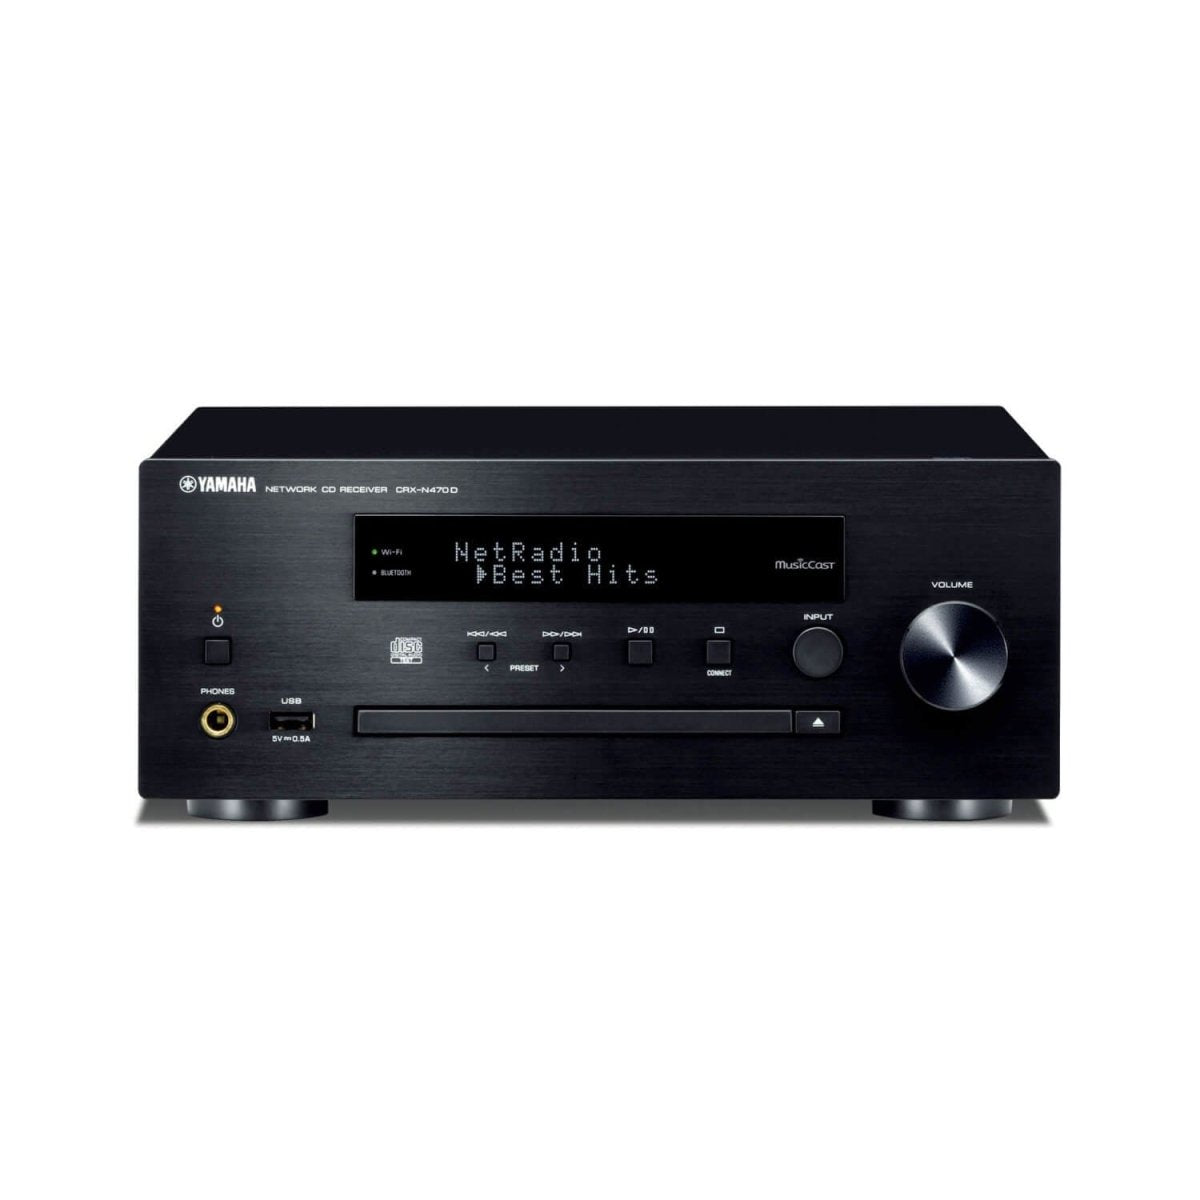 Yamaha CRXN470D MusicCast Networked CD Receiver with DAB-FM radio - Black | Atlantic Electrics